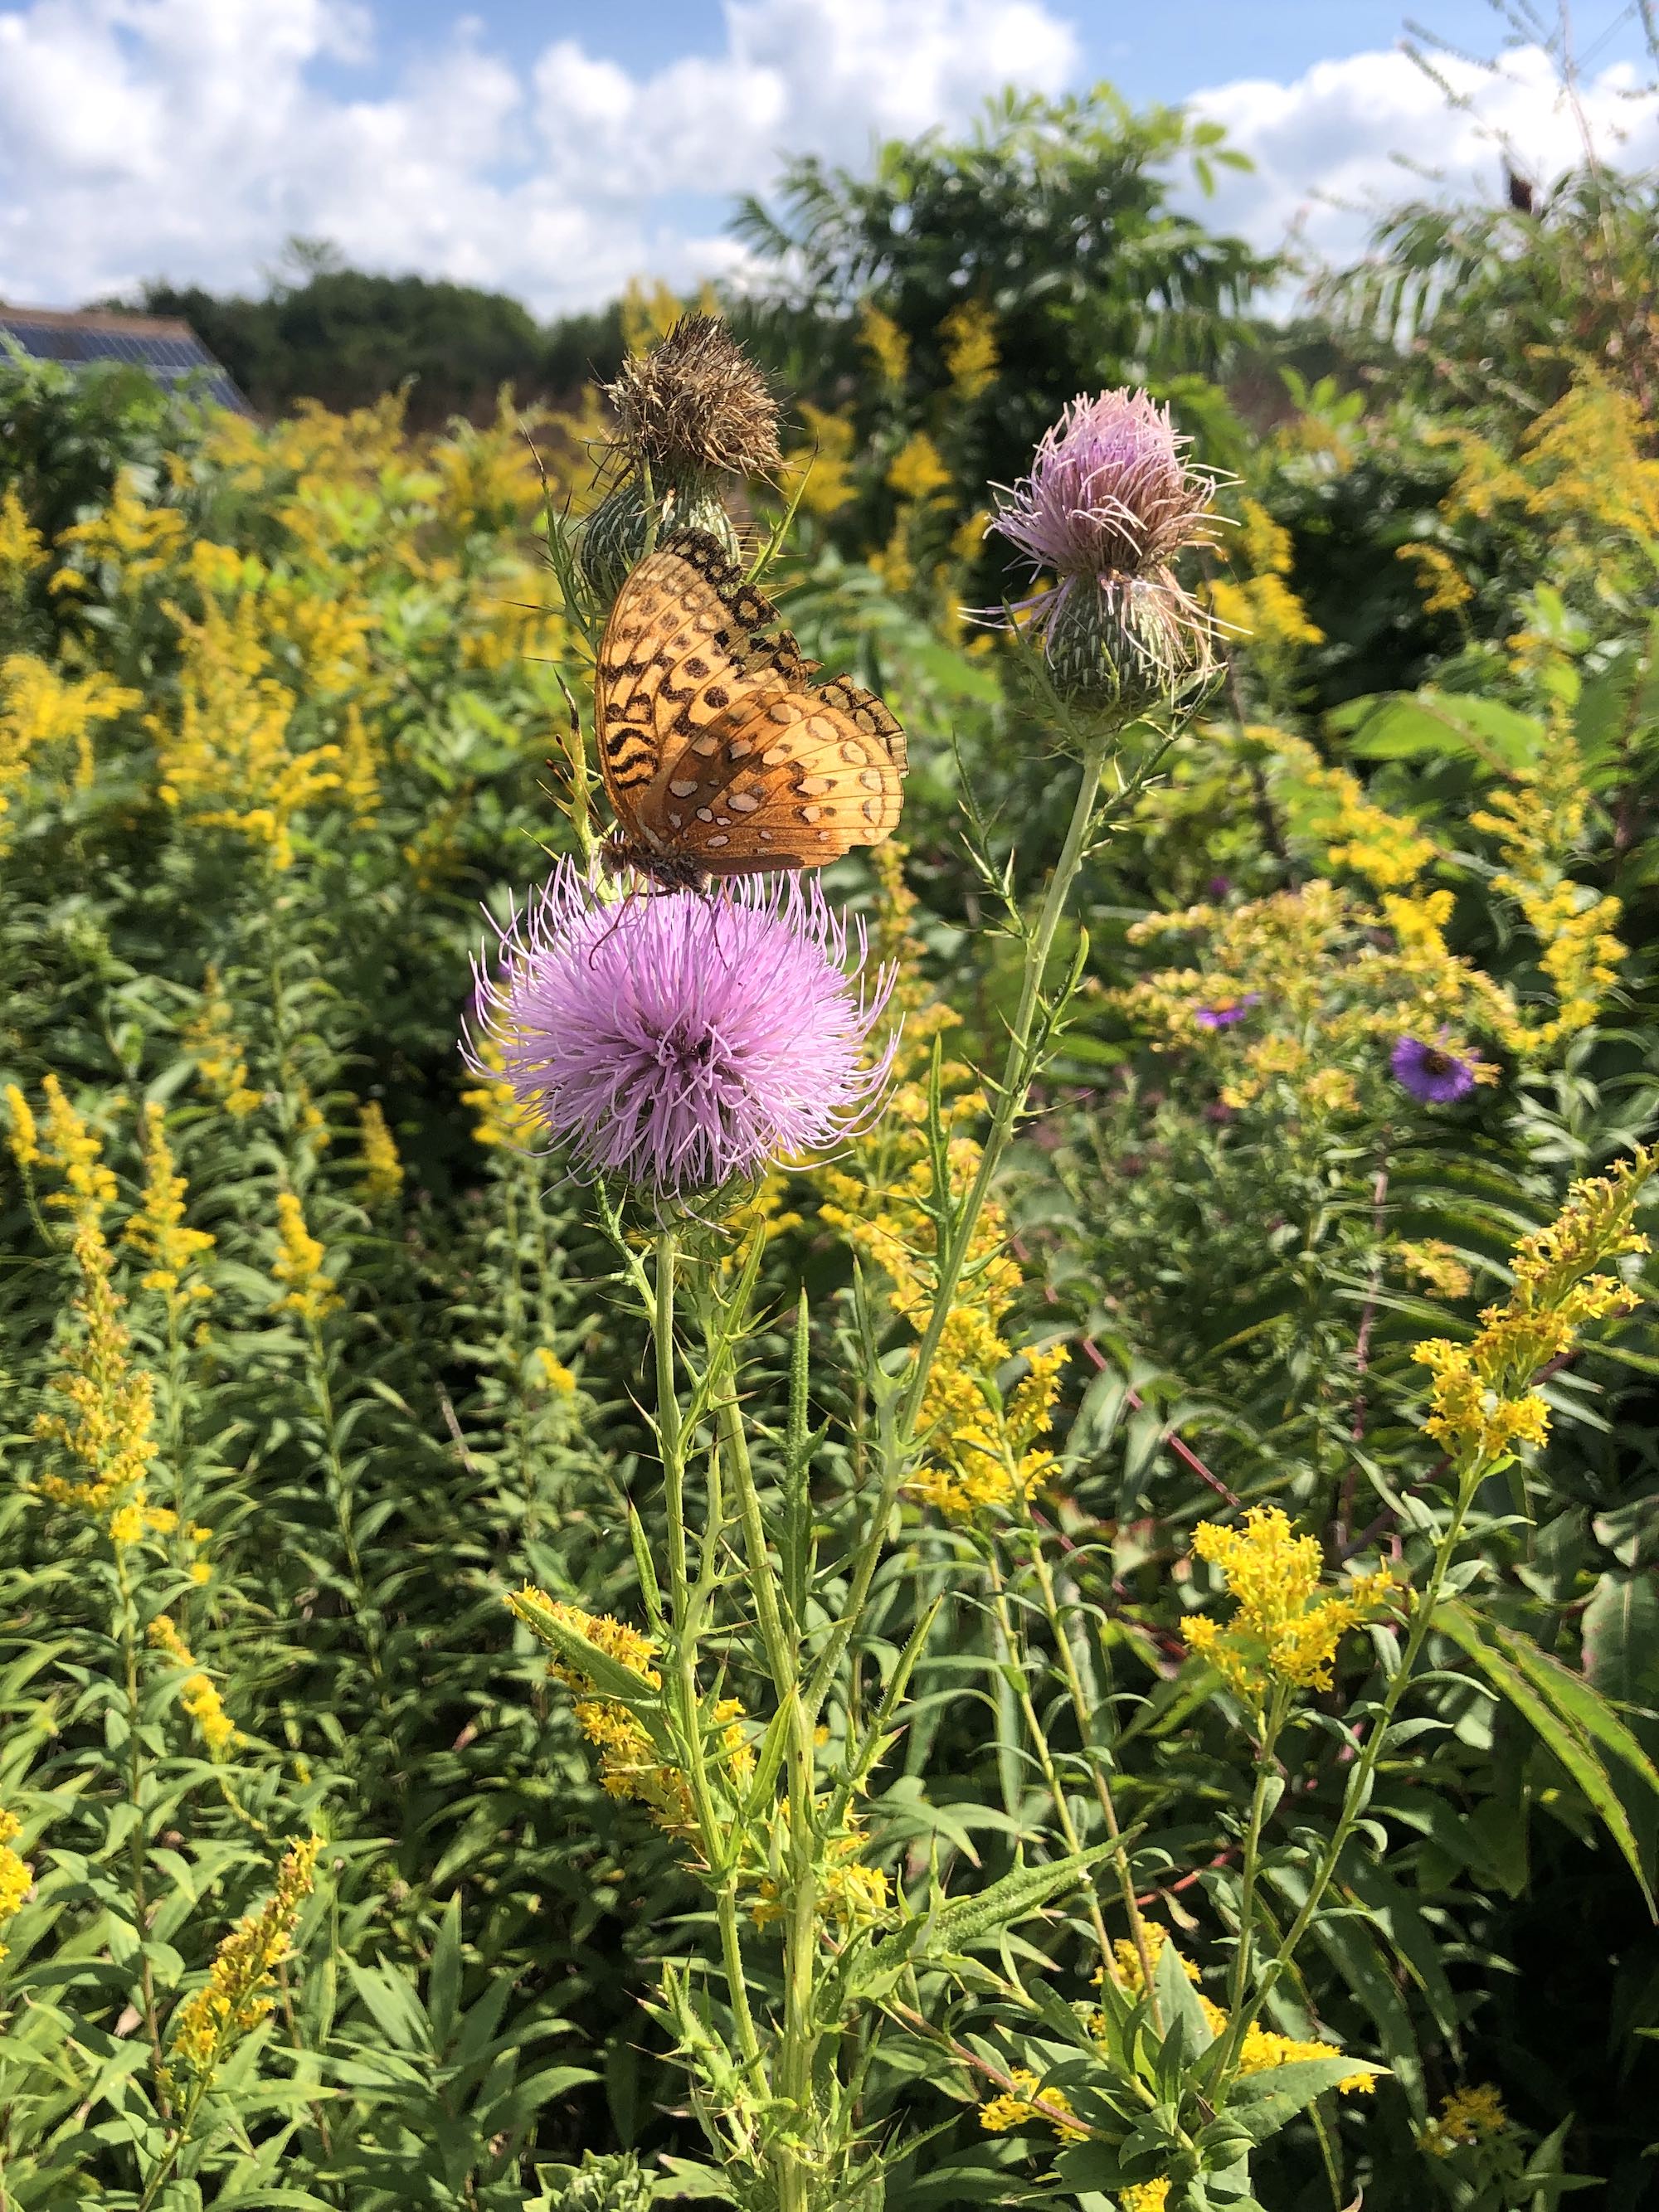 Aphrodite Fritillary butterfly on Field Thistle in UW Arboretum Curtis Prairie in Madison, Wisconsin on September 7, 2022.